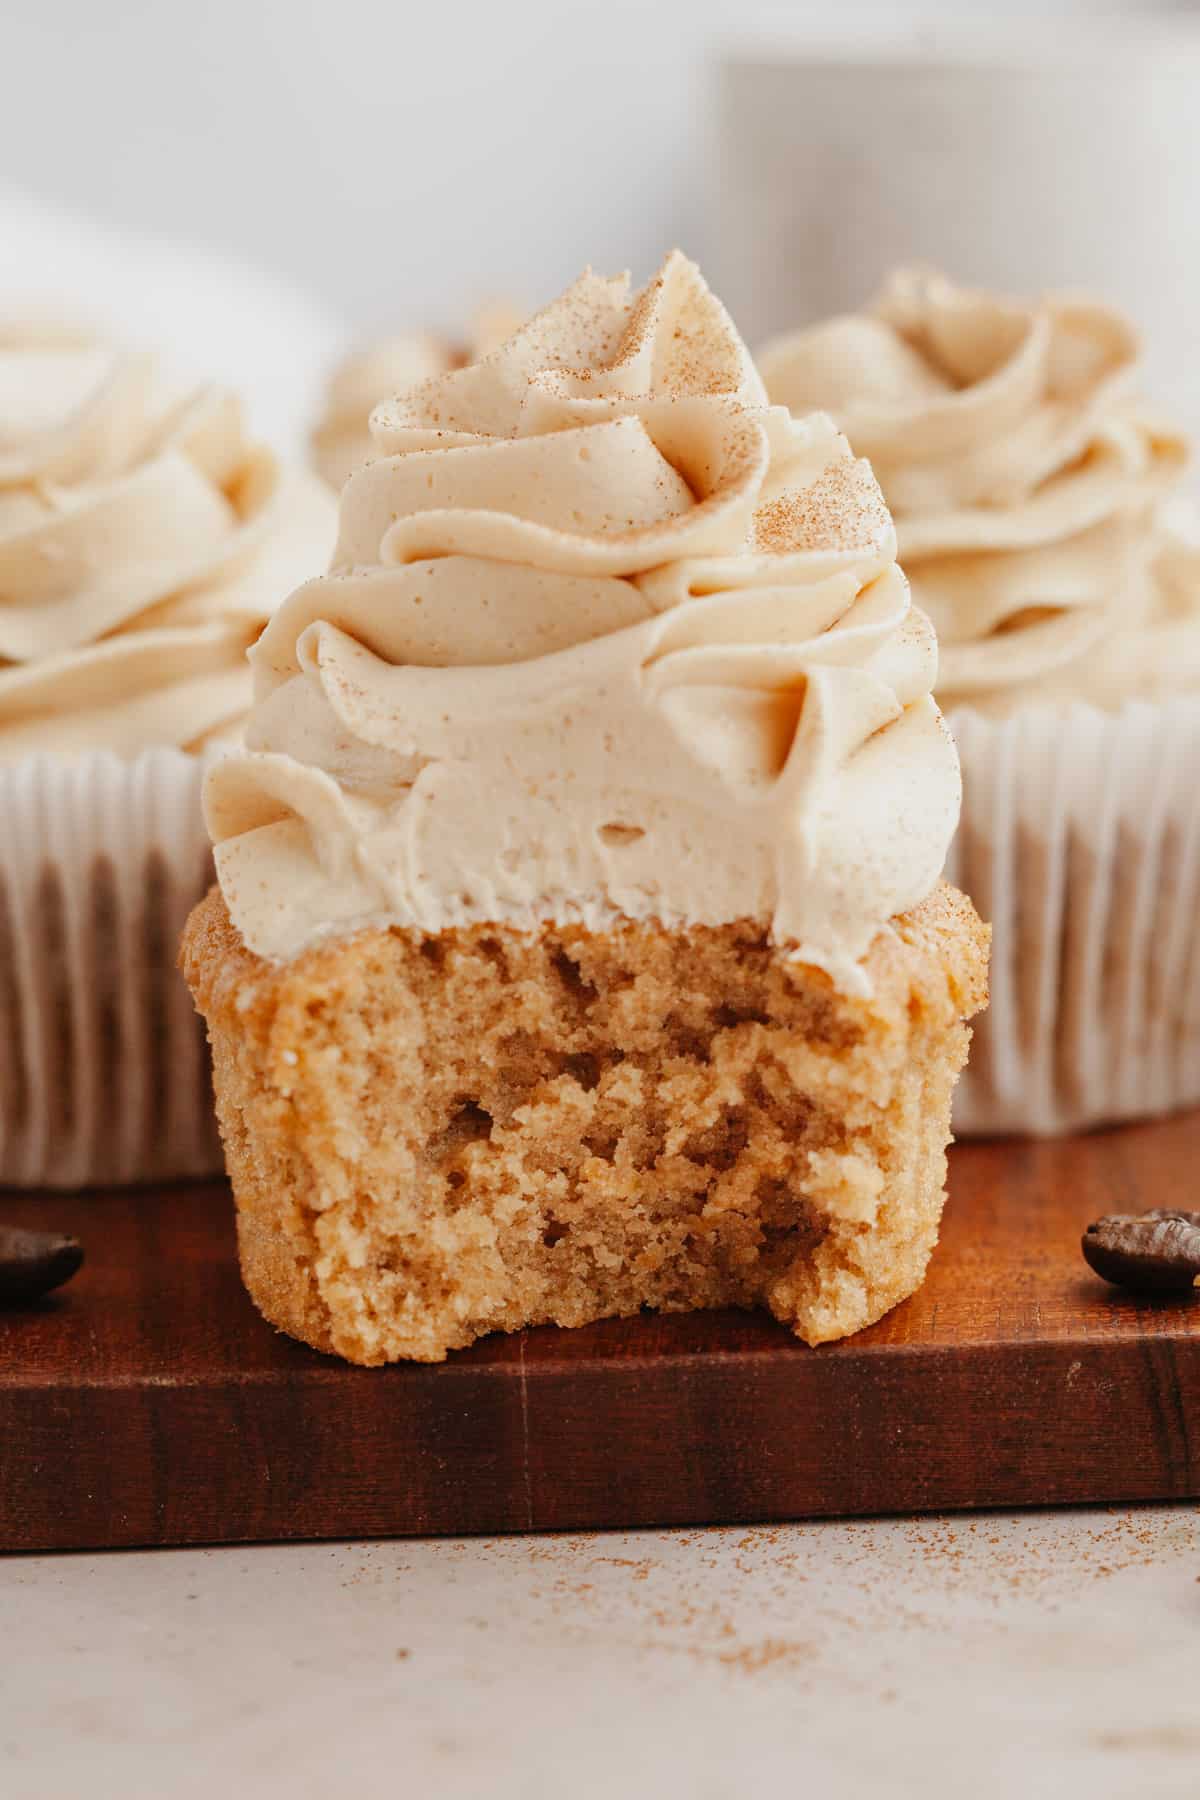 A close up of an espresso cupcake with a bite taken out of it.